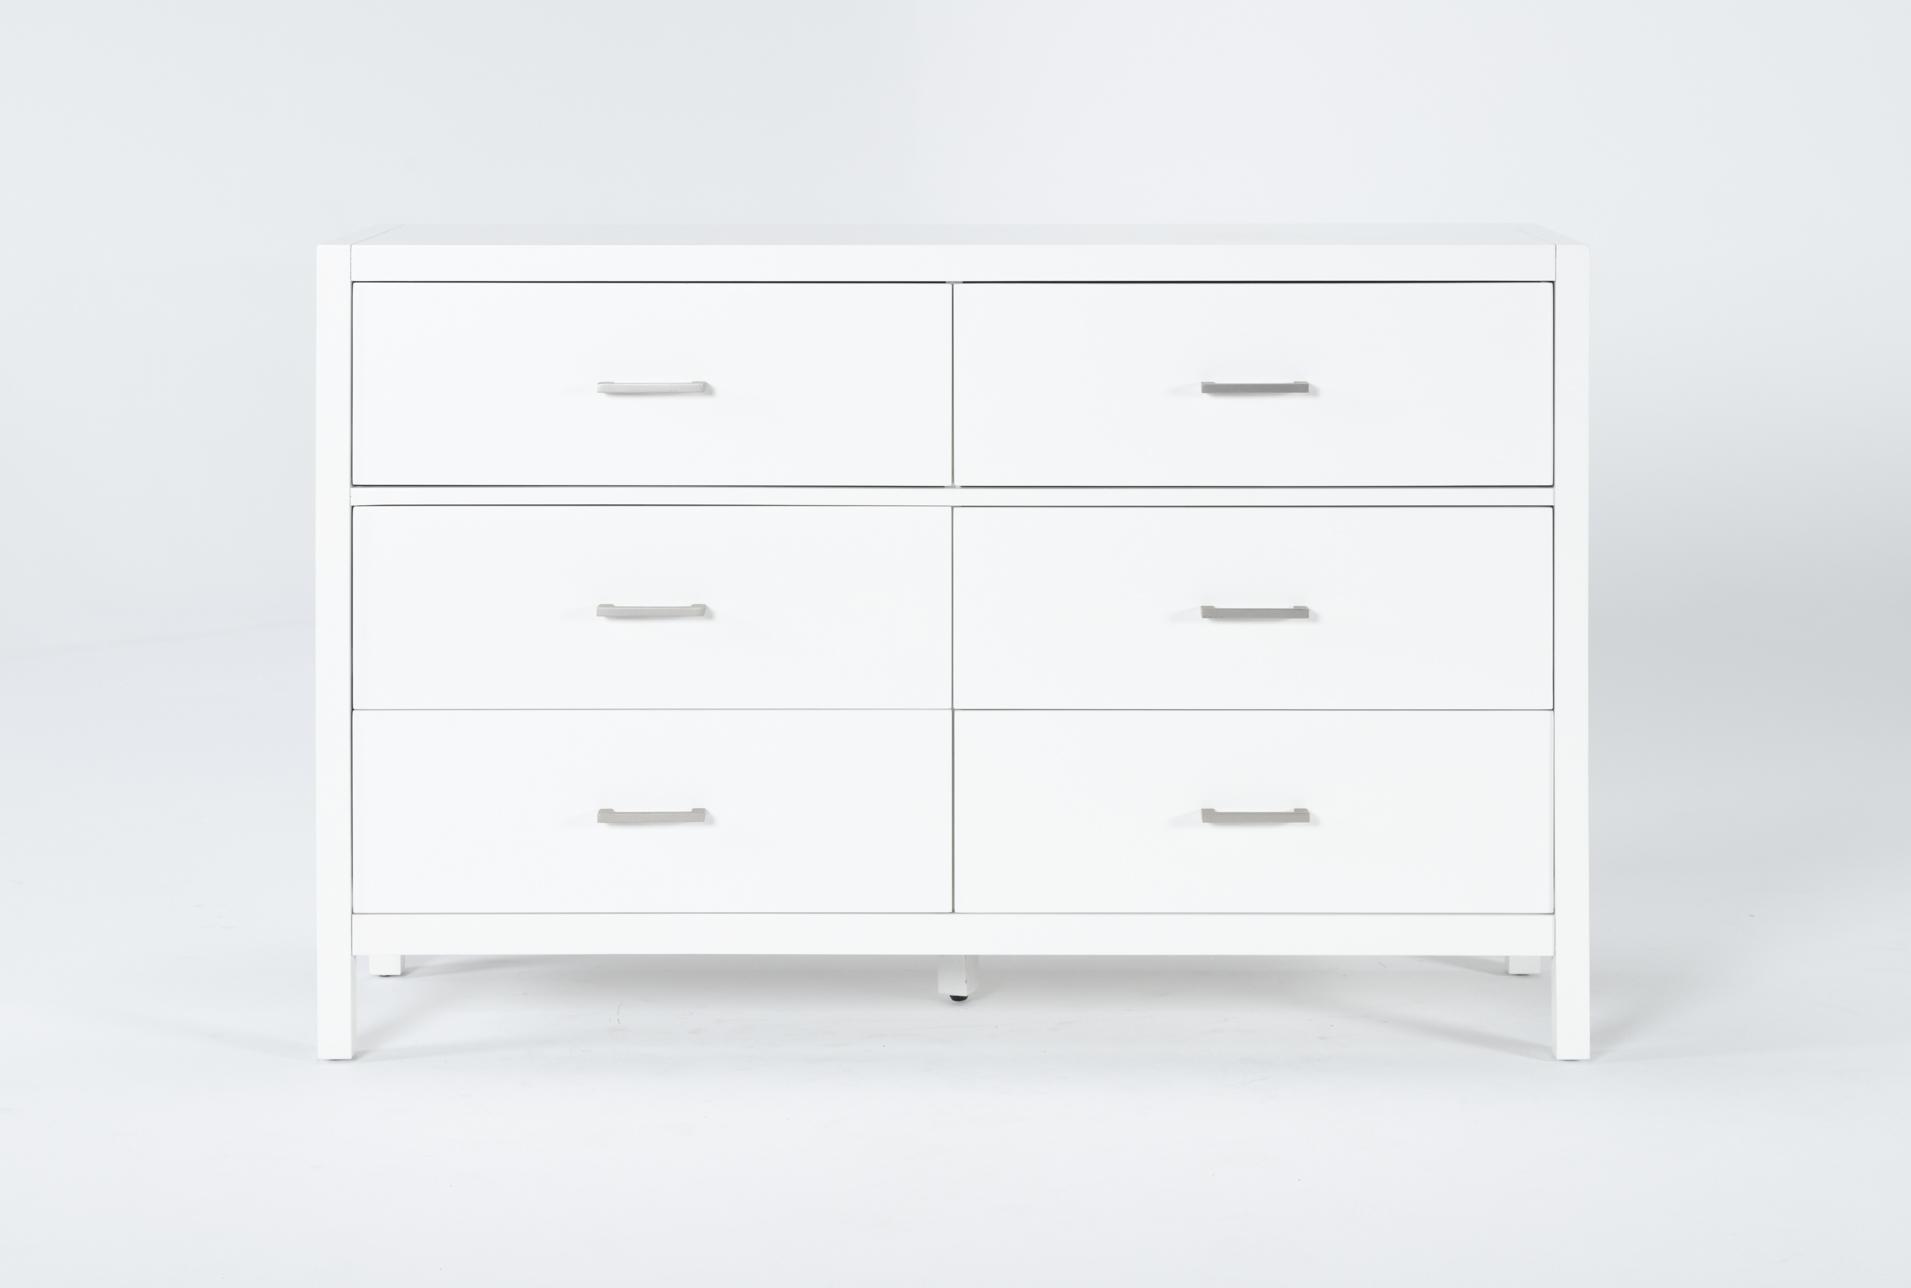 dressers for kids